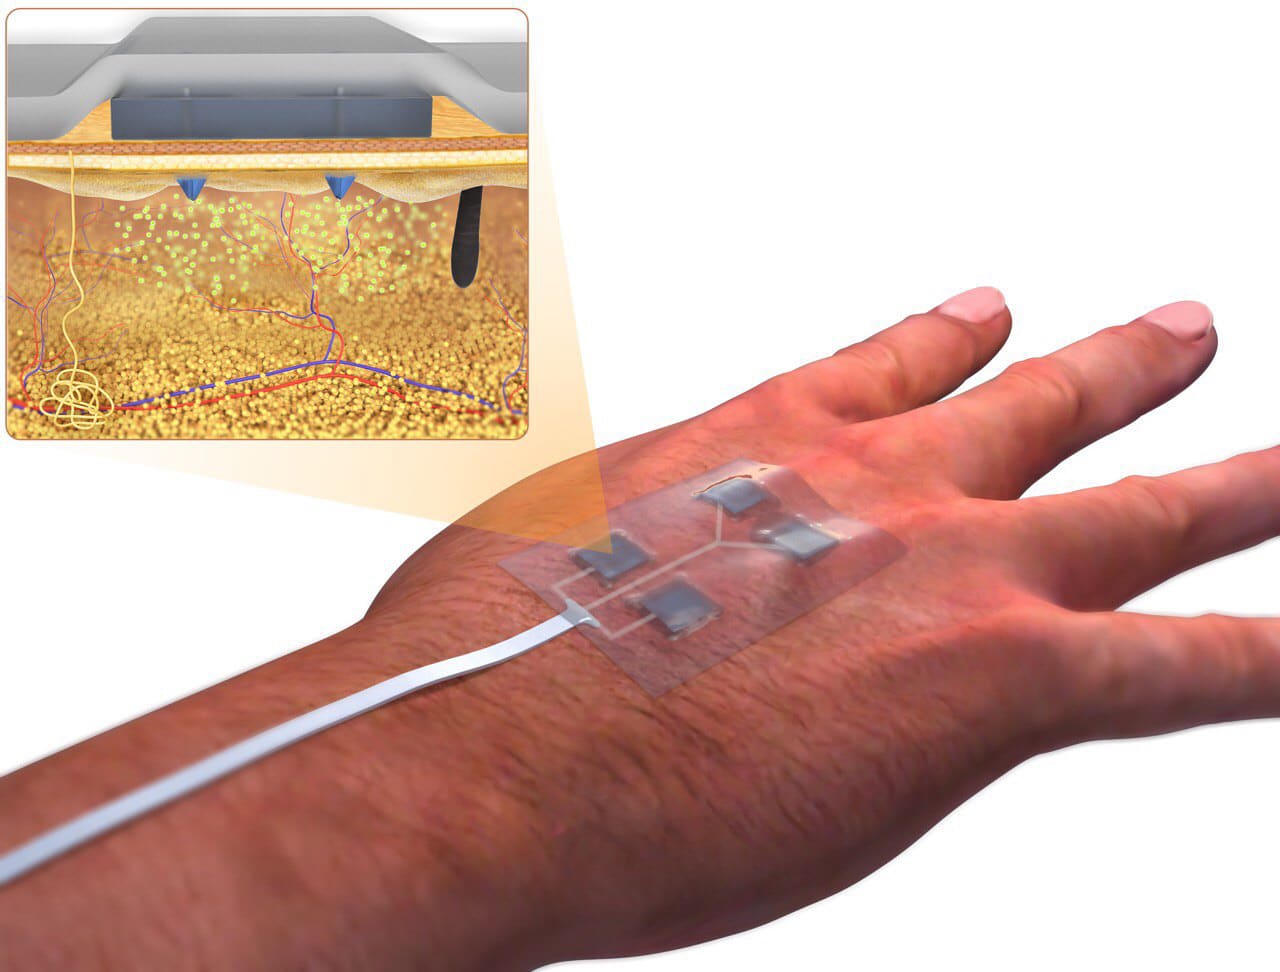 new "smart bandage" that could improve clinical care.